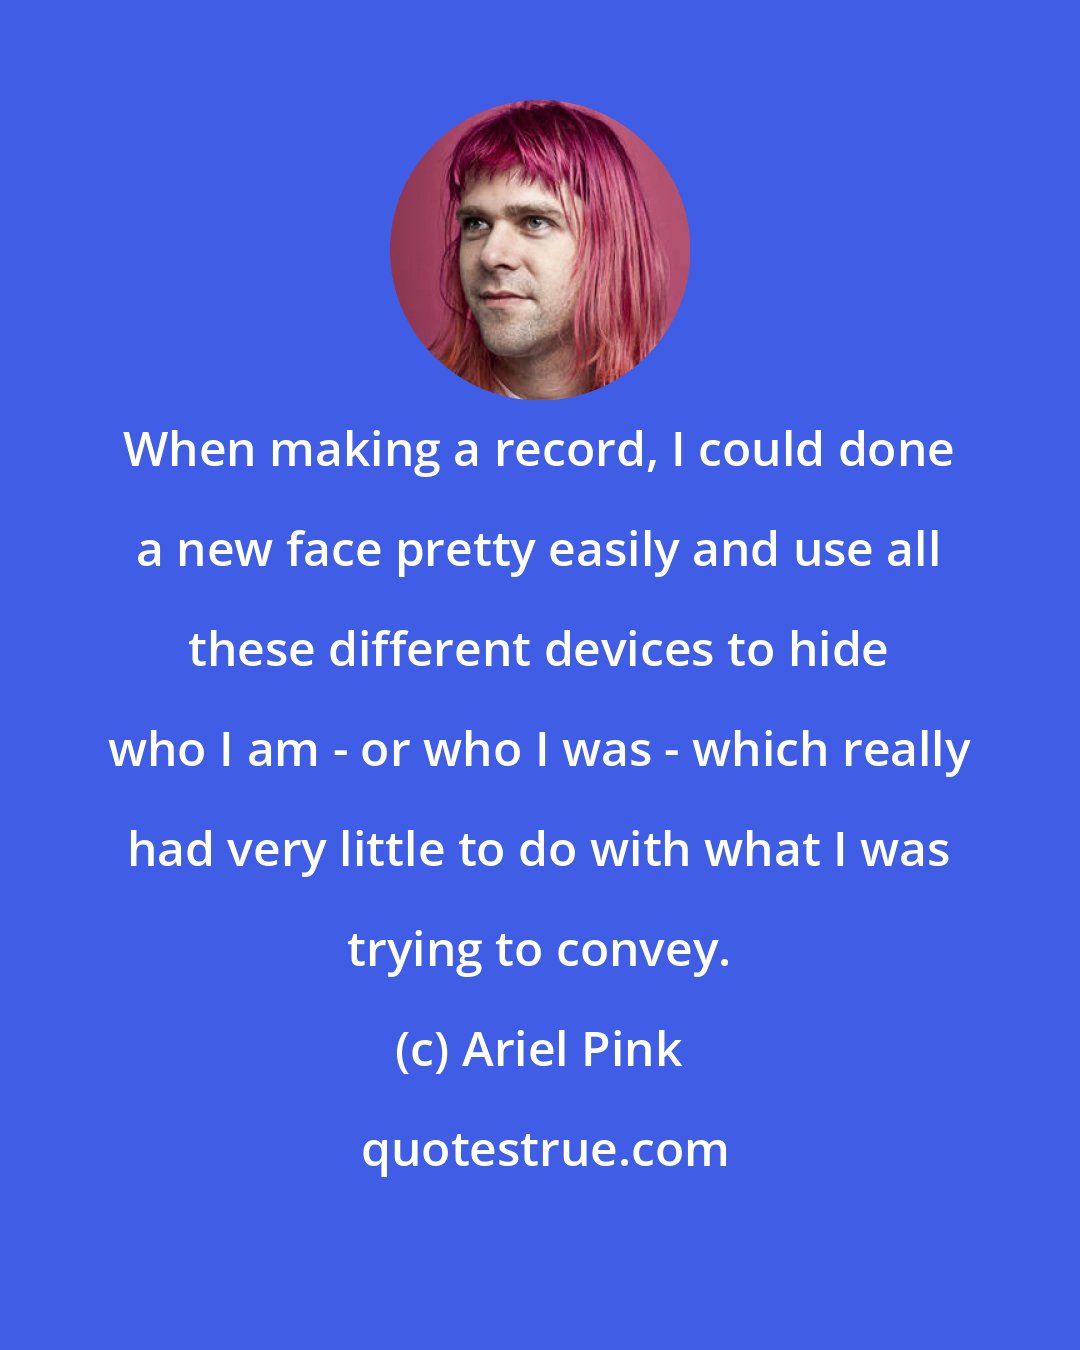 Ariel Pink: When making a record, I could done a new face pretty easily and use all these different devices to hide who I am - or who I was - which really had very little to do with what I was trying to convey.